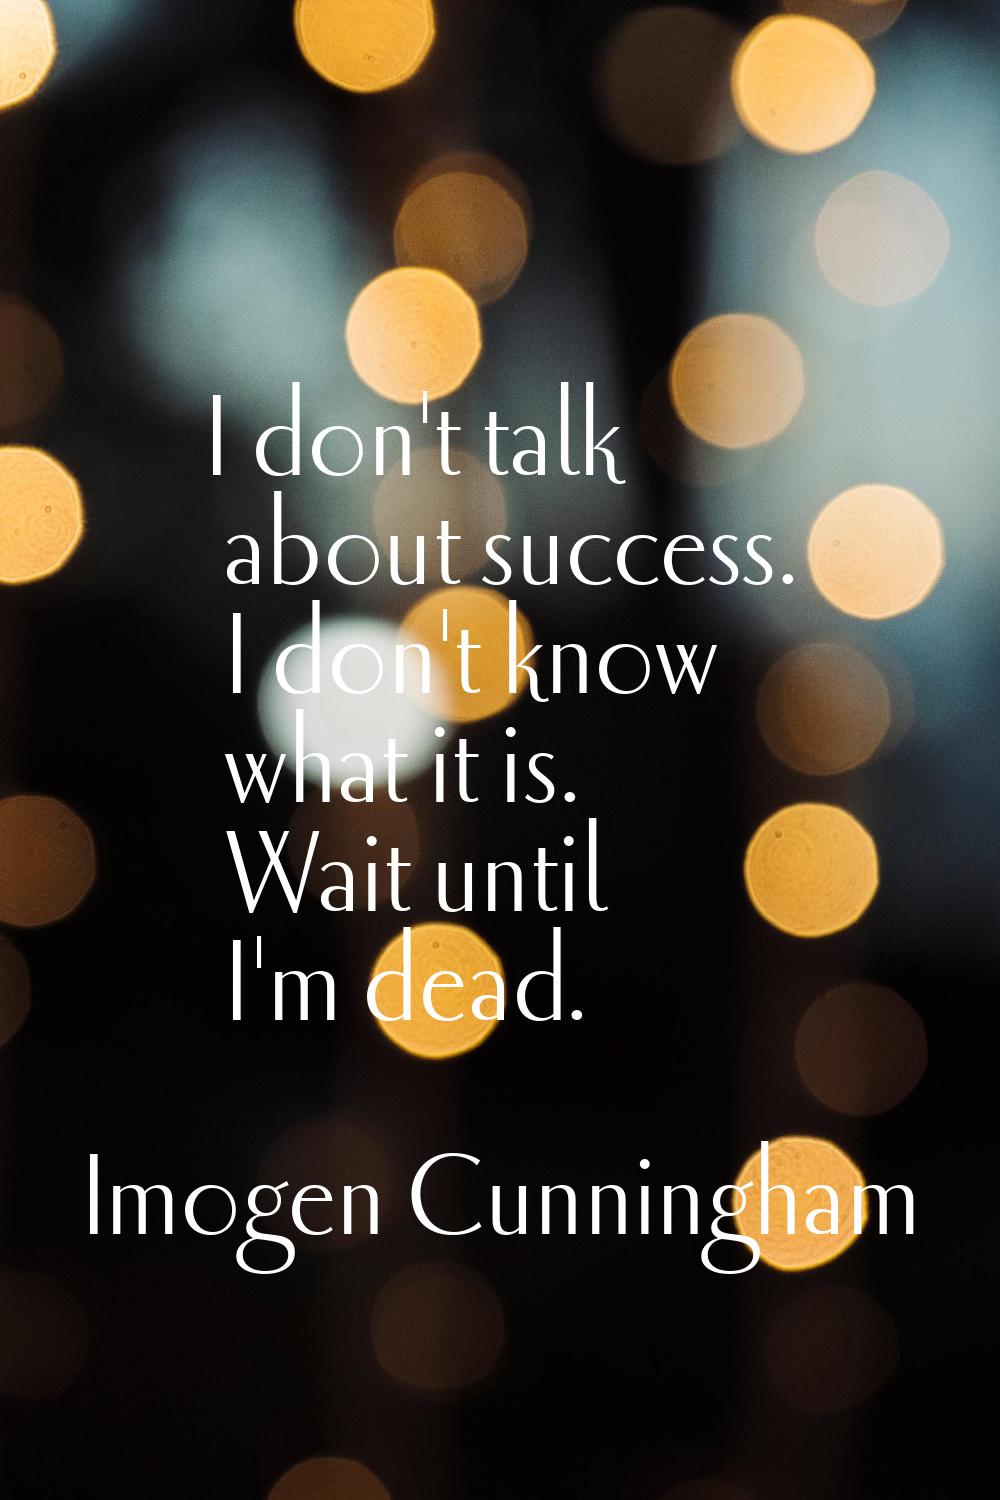 I don't talk about success. I don't know what it is. Wait until I'm dead.